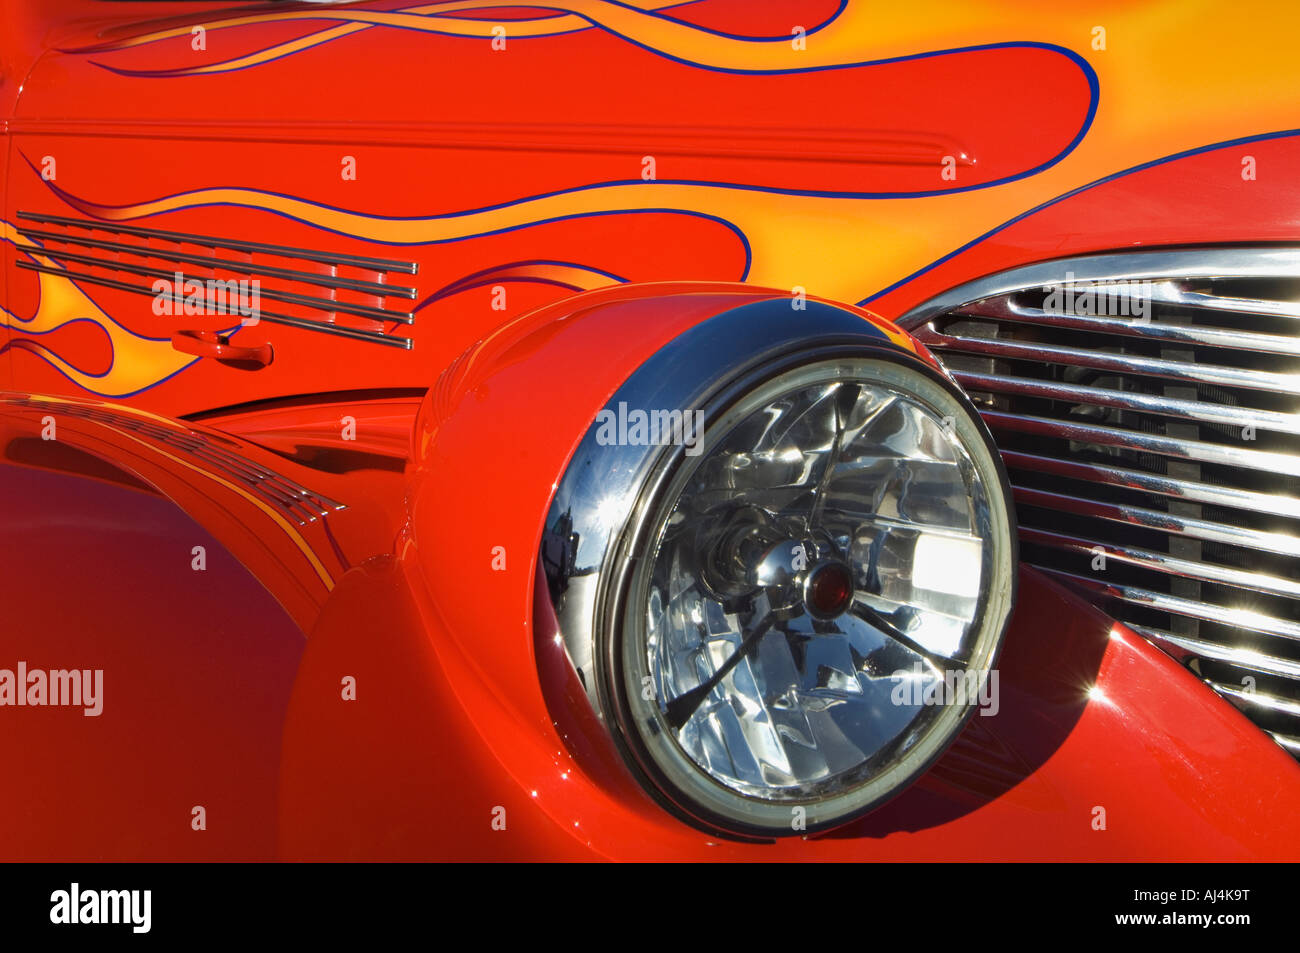 Detail of Head Light Fender Grill and Side of Customized 1939 Chevy Street Rod Stock Photo